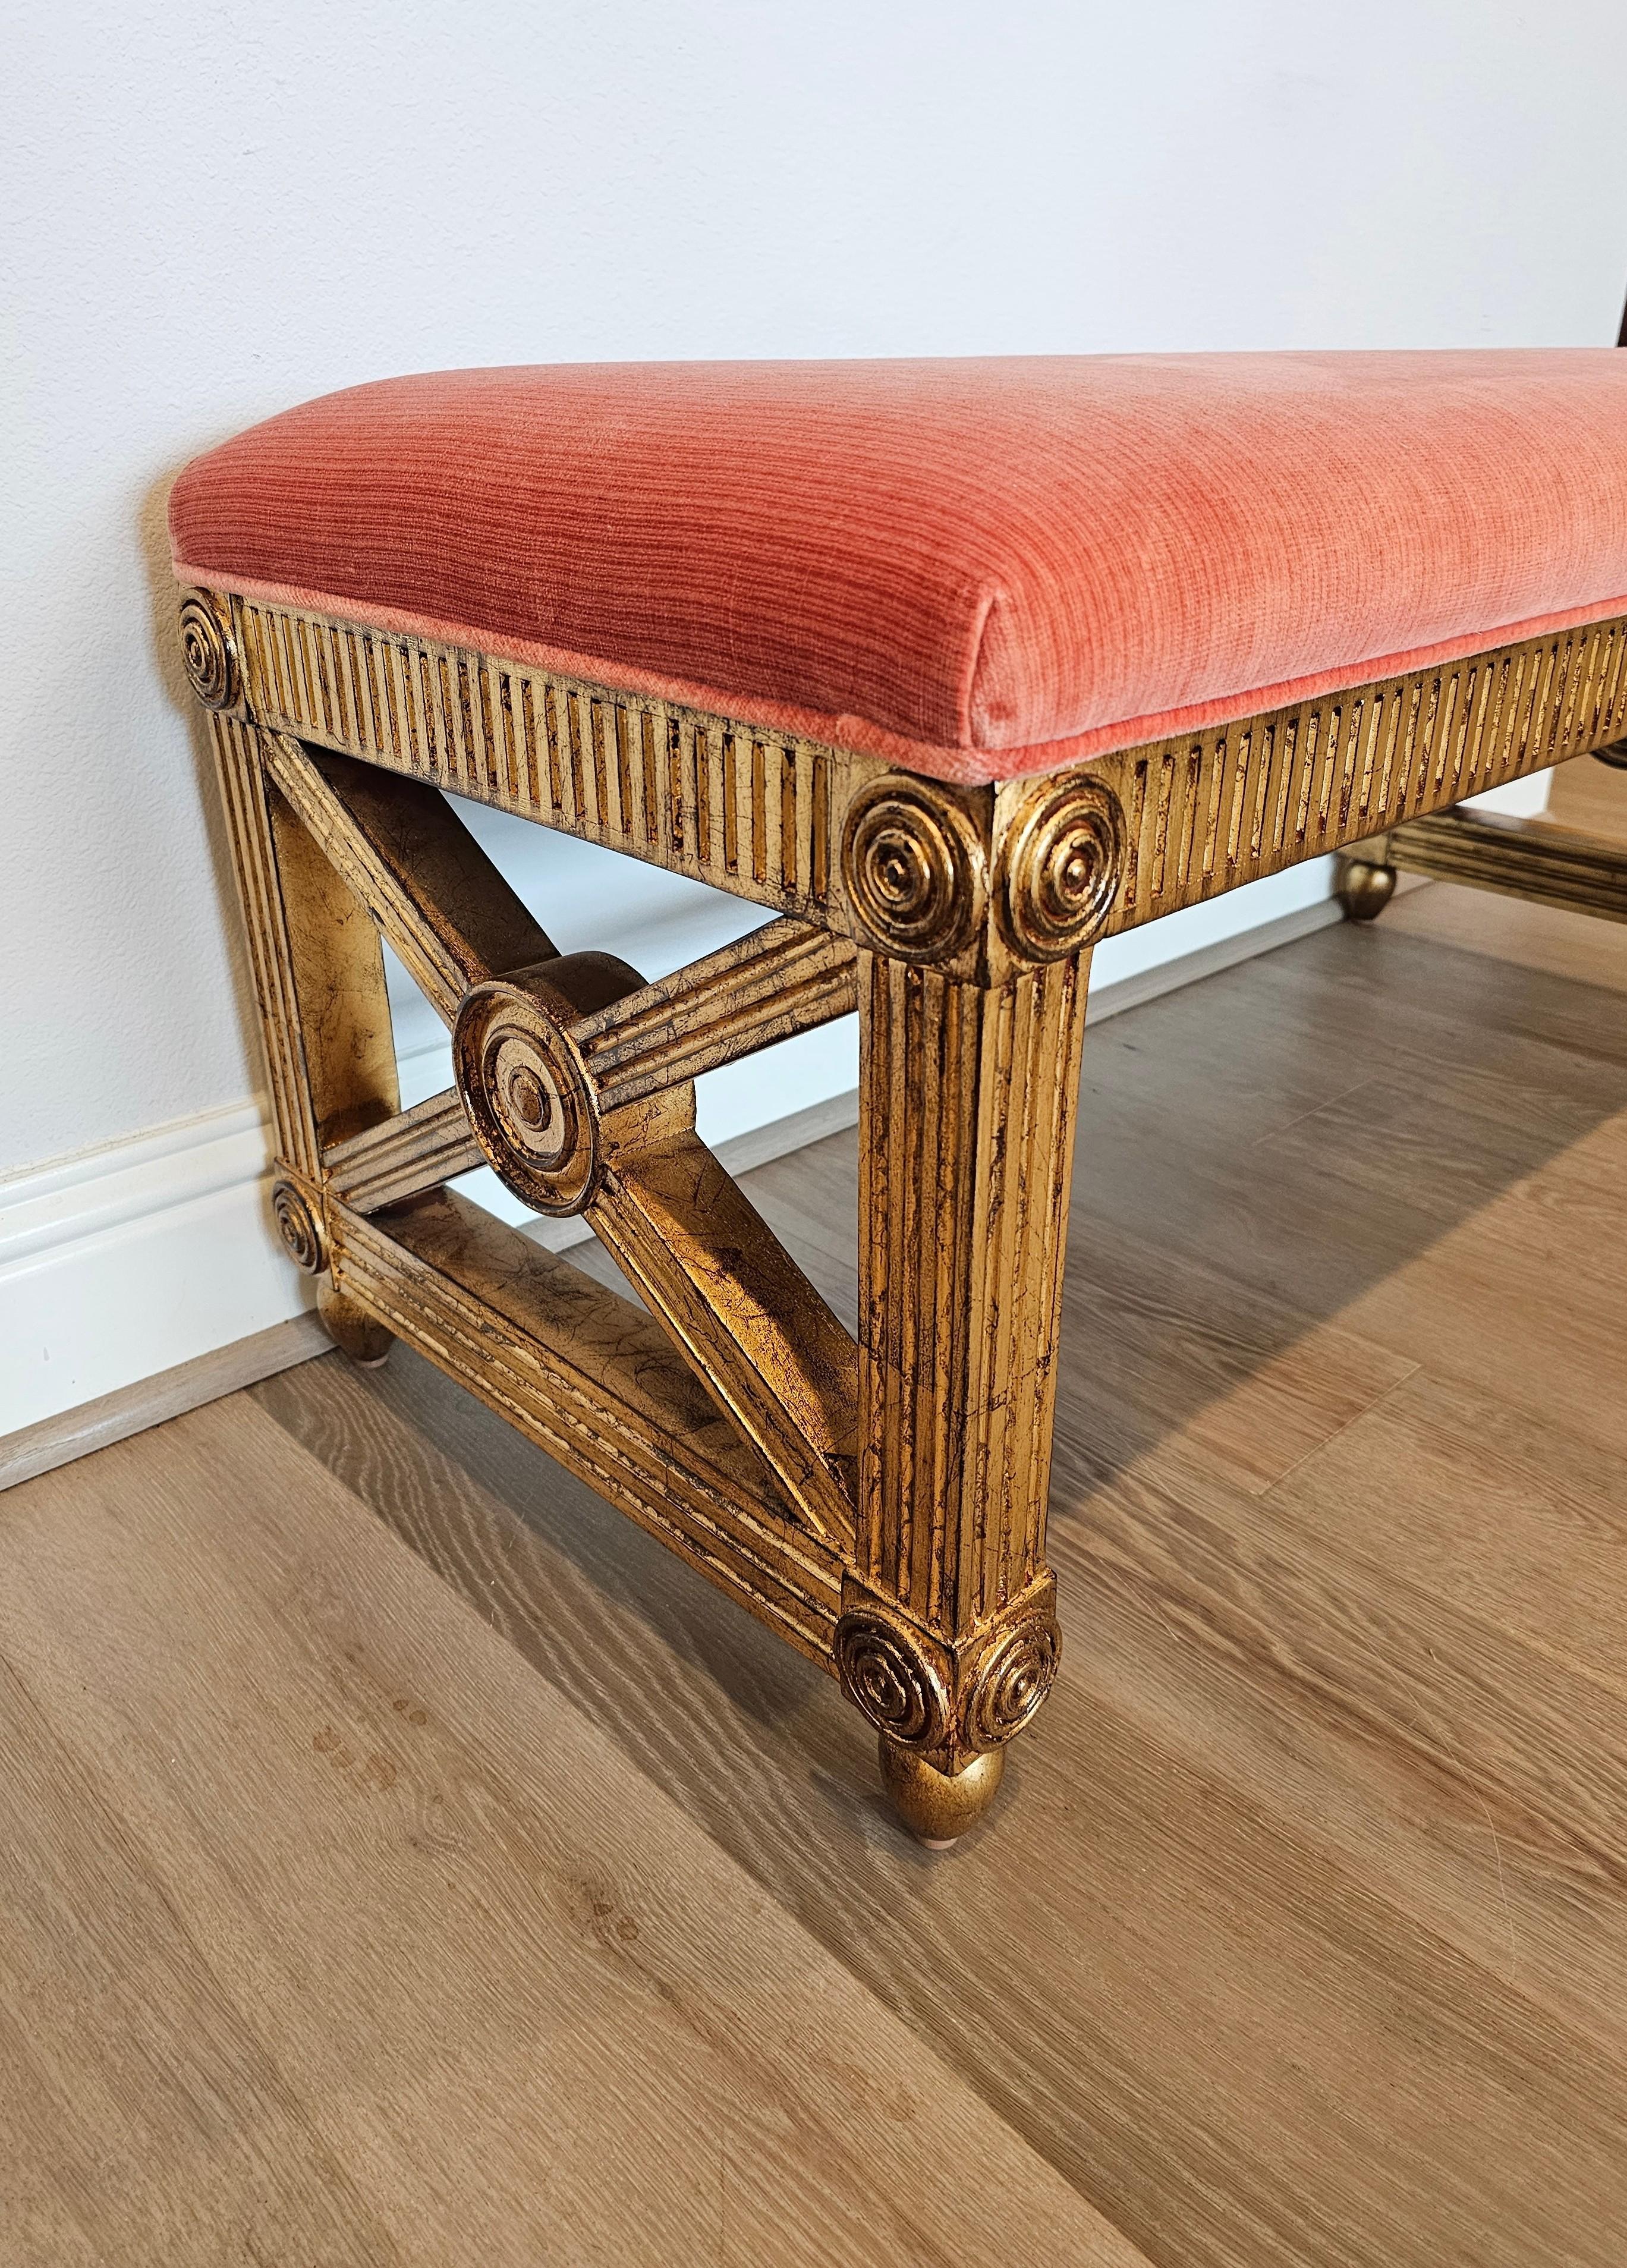 A stunning contemporary Neo-classical style Gregory bench by fine quality luxury furniture designer Theodore Alexander. 

The Gregory features a sophisticated Louis XVI style Neoclassical inspired design, having a reeded upper rail, fluted legs and